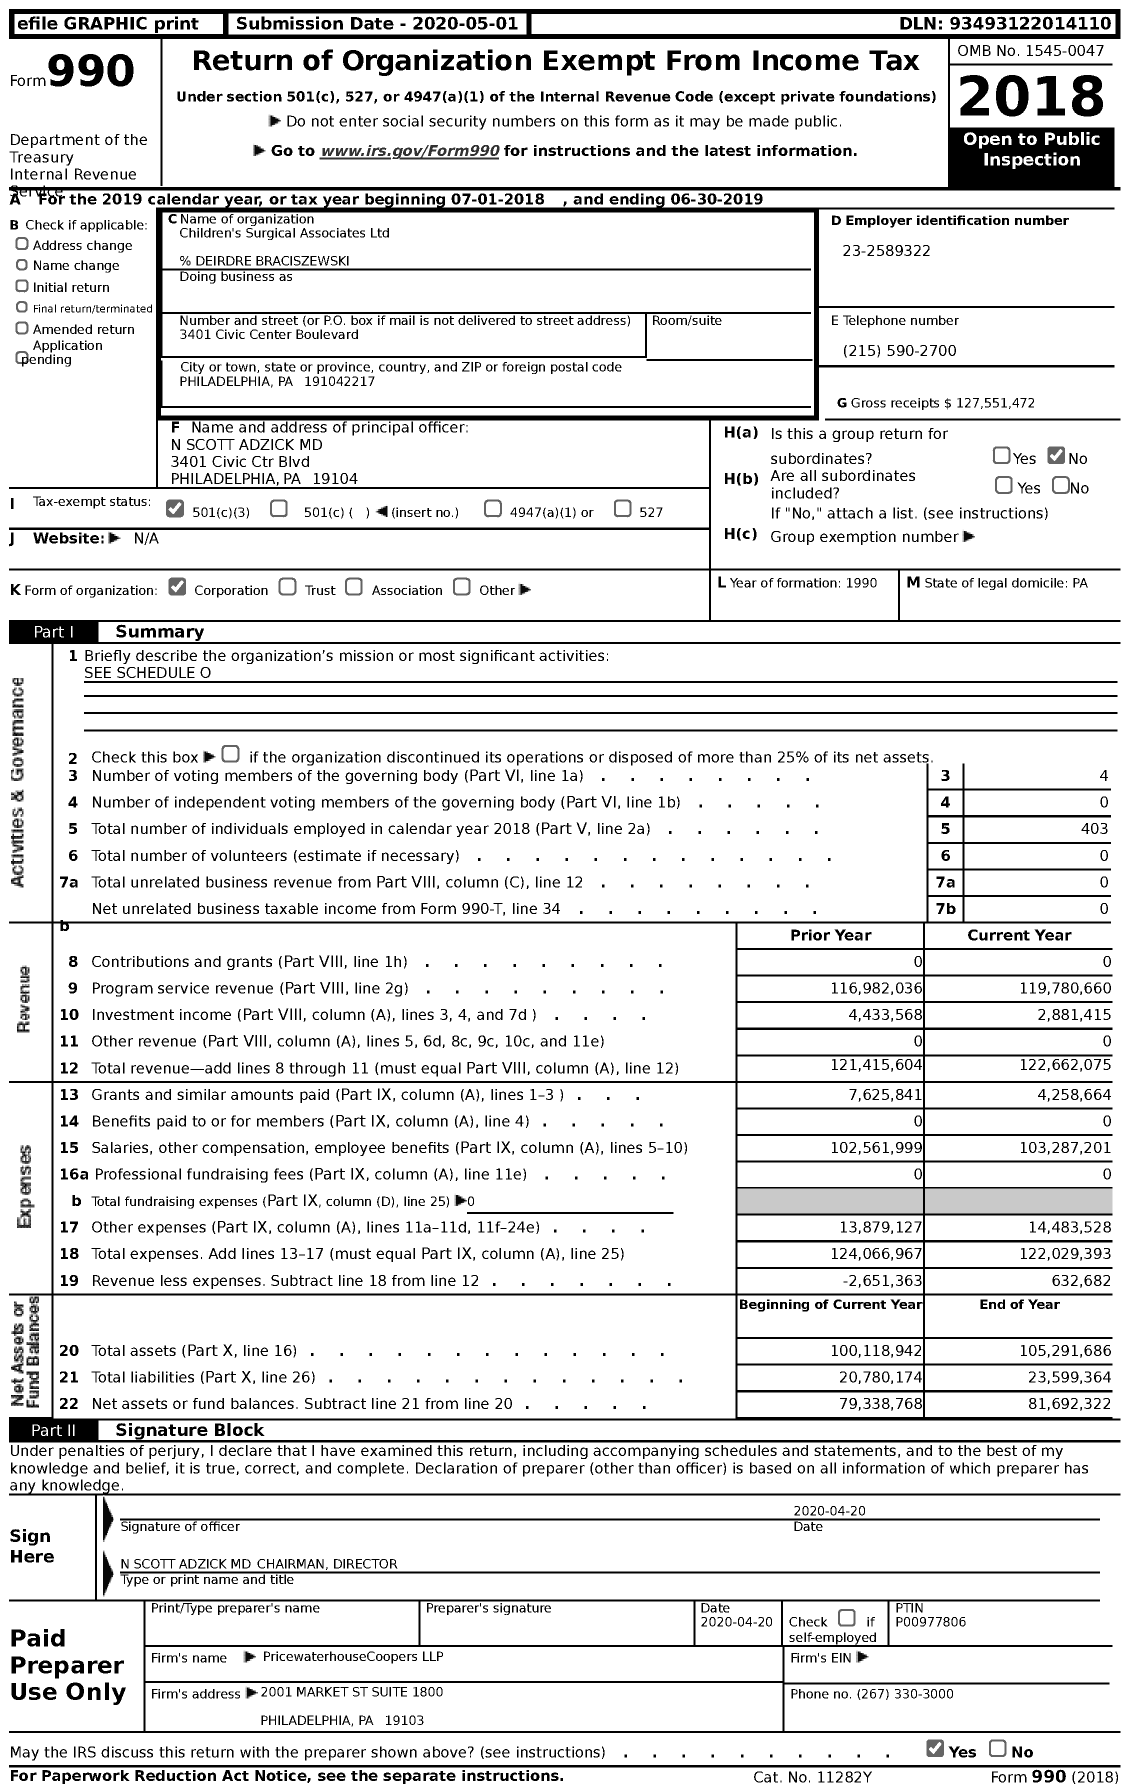 Image of first page of 2018 Form 990 for Children's Surgical Associates (CSA)